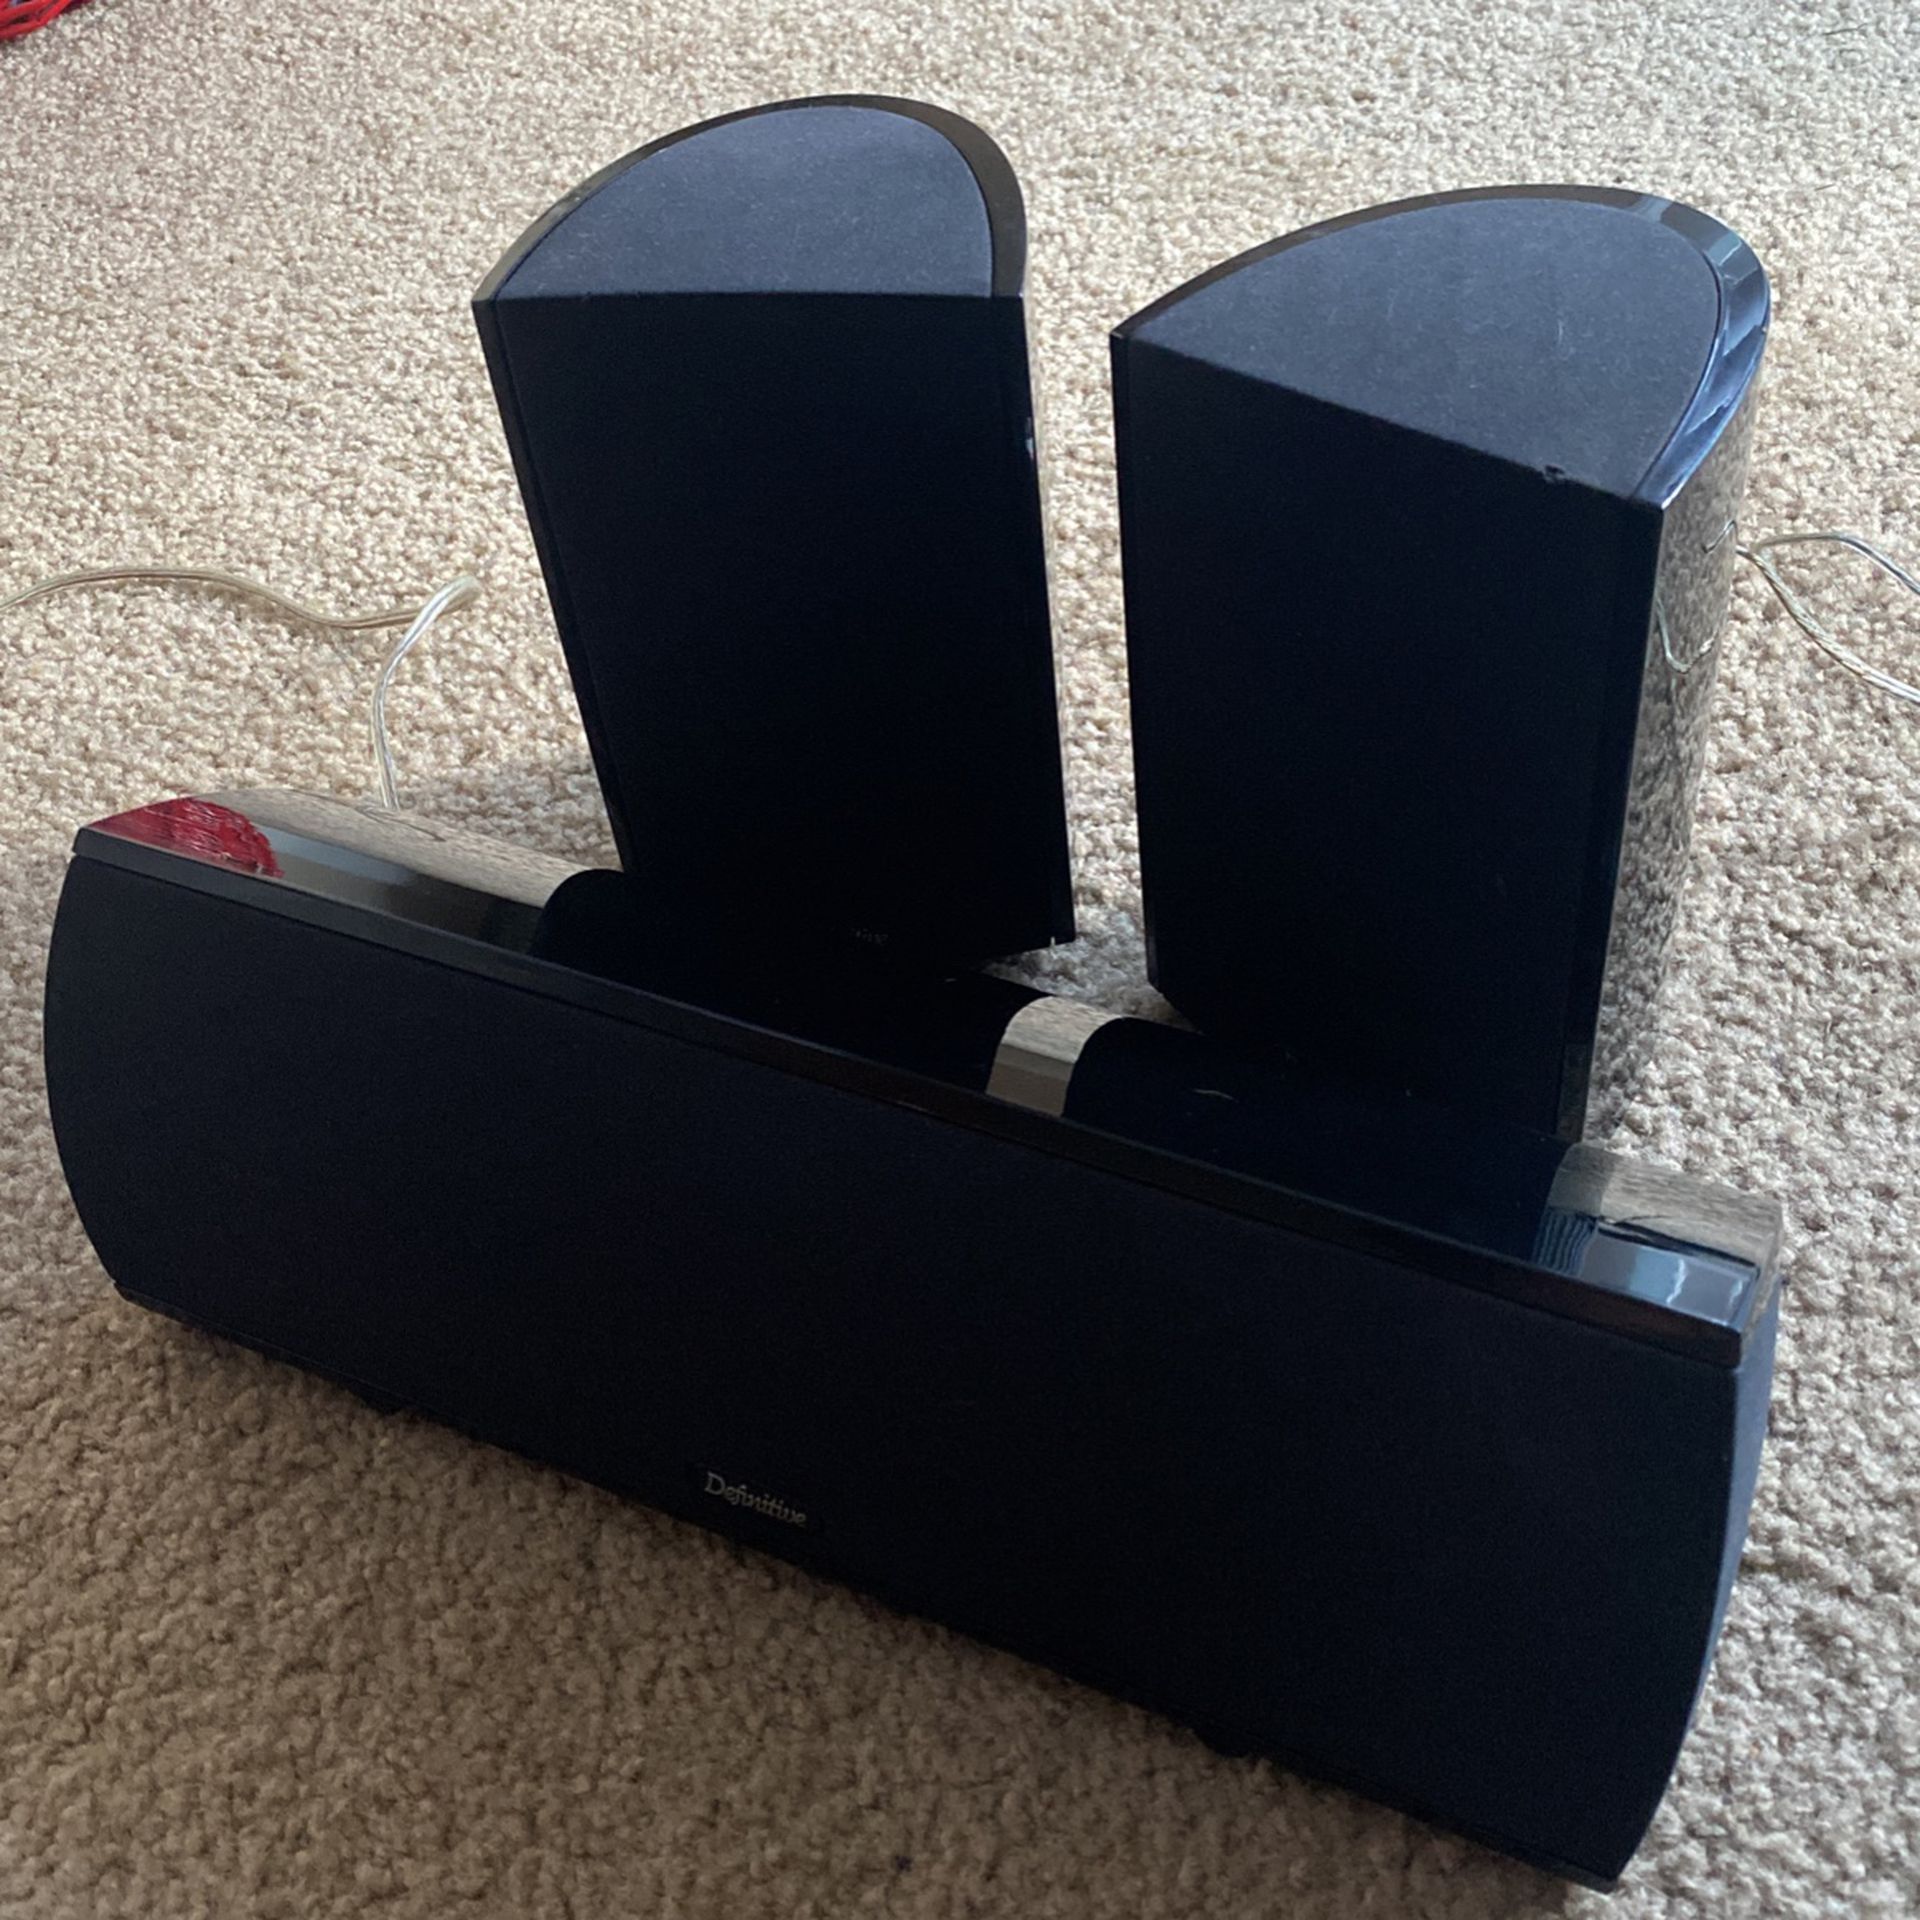 Definitive Book Shelf Speakers And Onkyo Stereo 